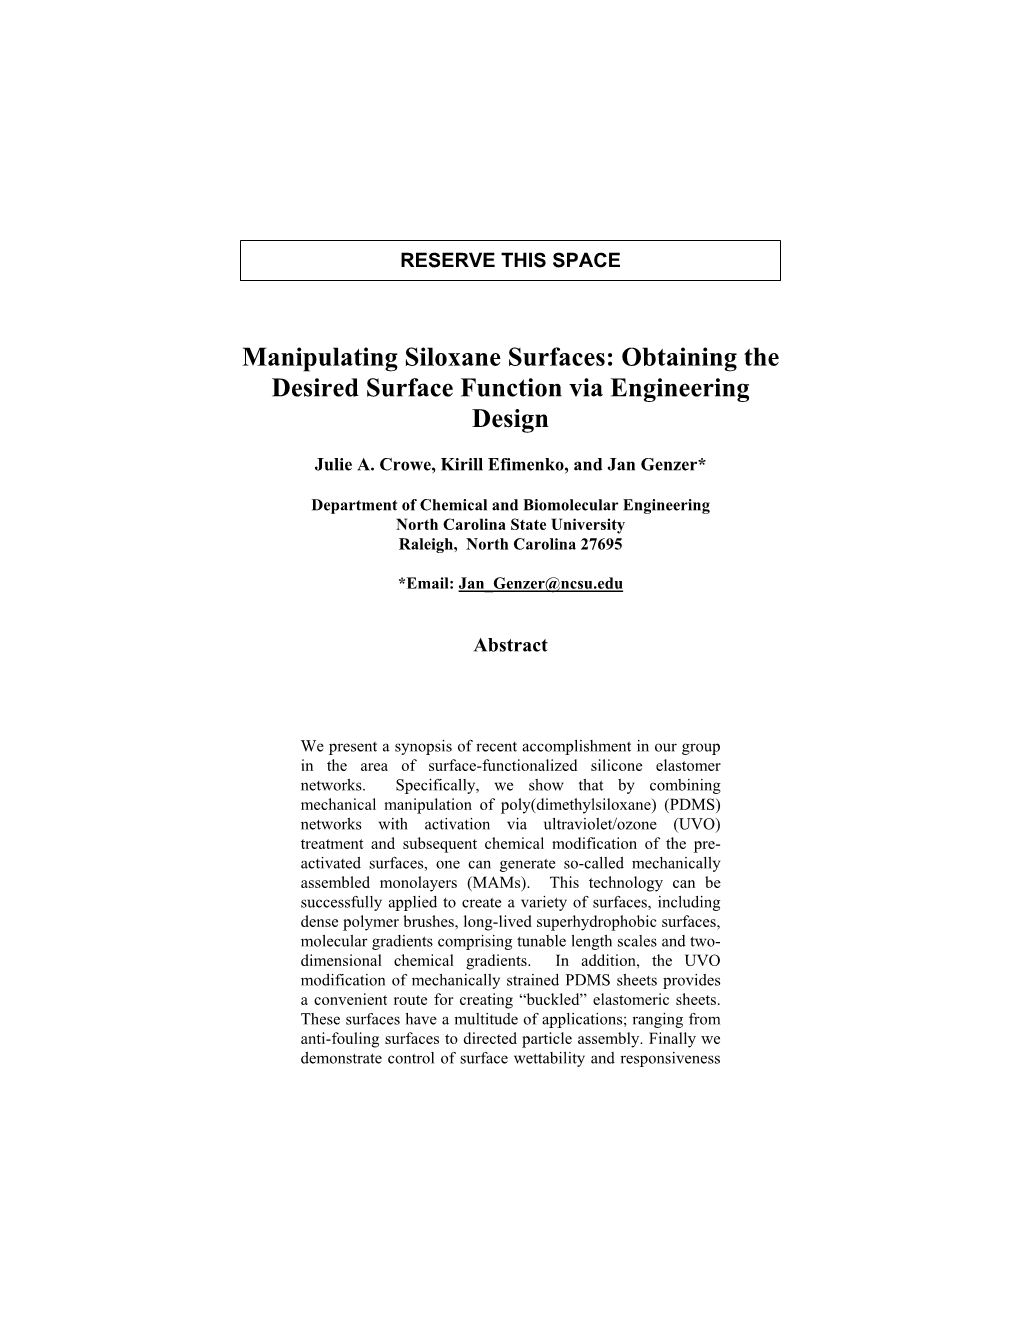 Manipulating Siloxane Surfaces: Obtaining the Desired Surface Function Via Engineering Design